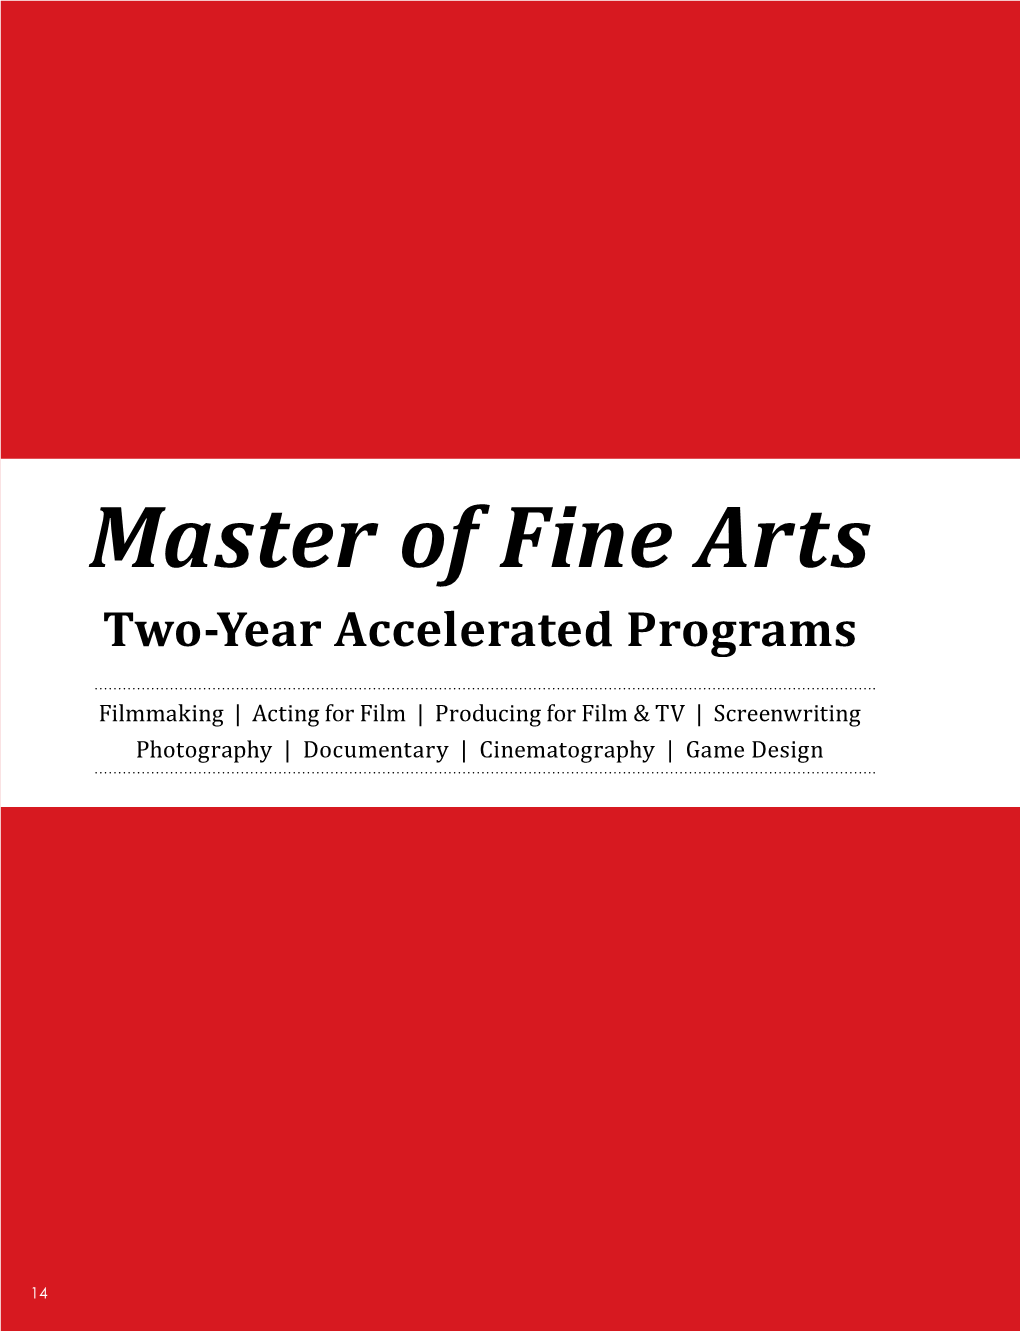 Master of Fine Arts Two-Year Accelerated Programs